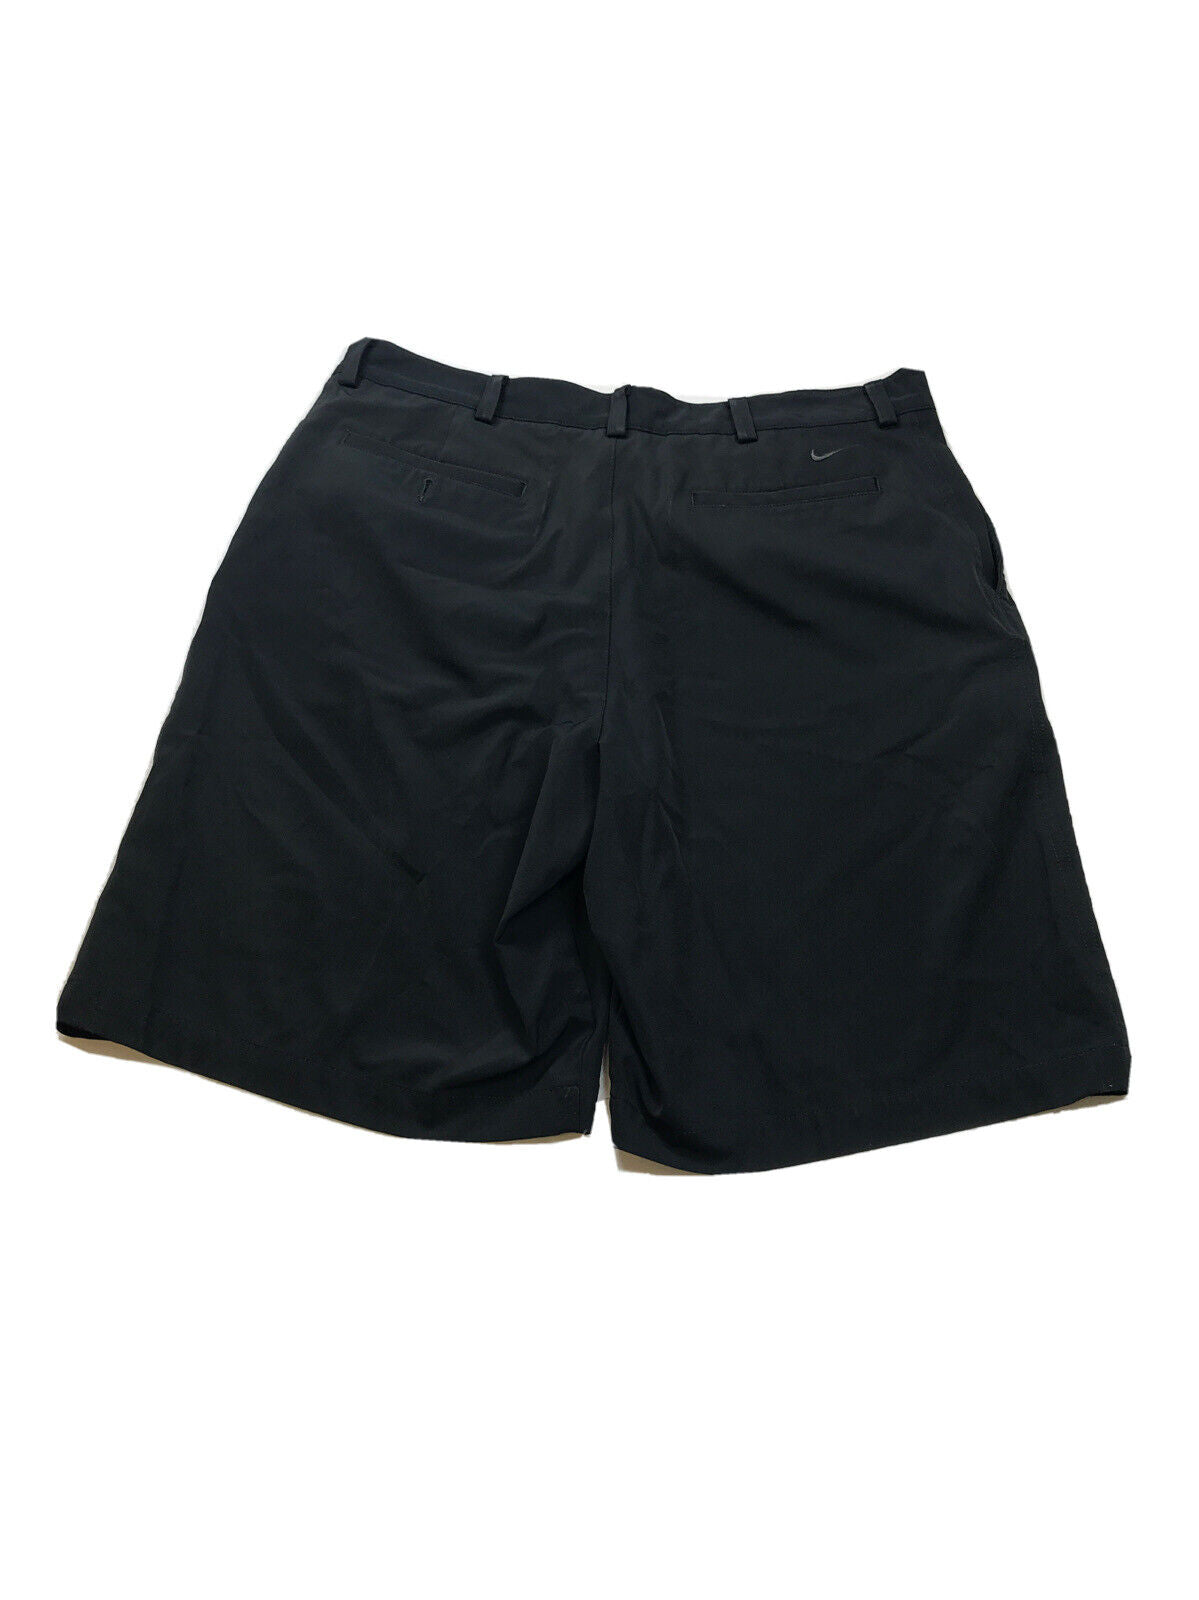 Nike Golf Men's Black Fit Dry Polyester Athletic Shorts - 36